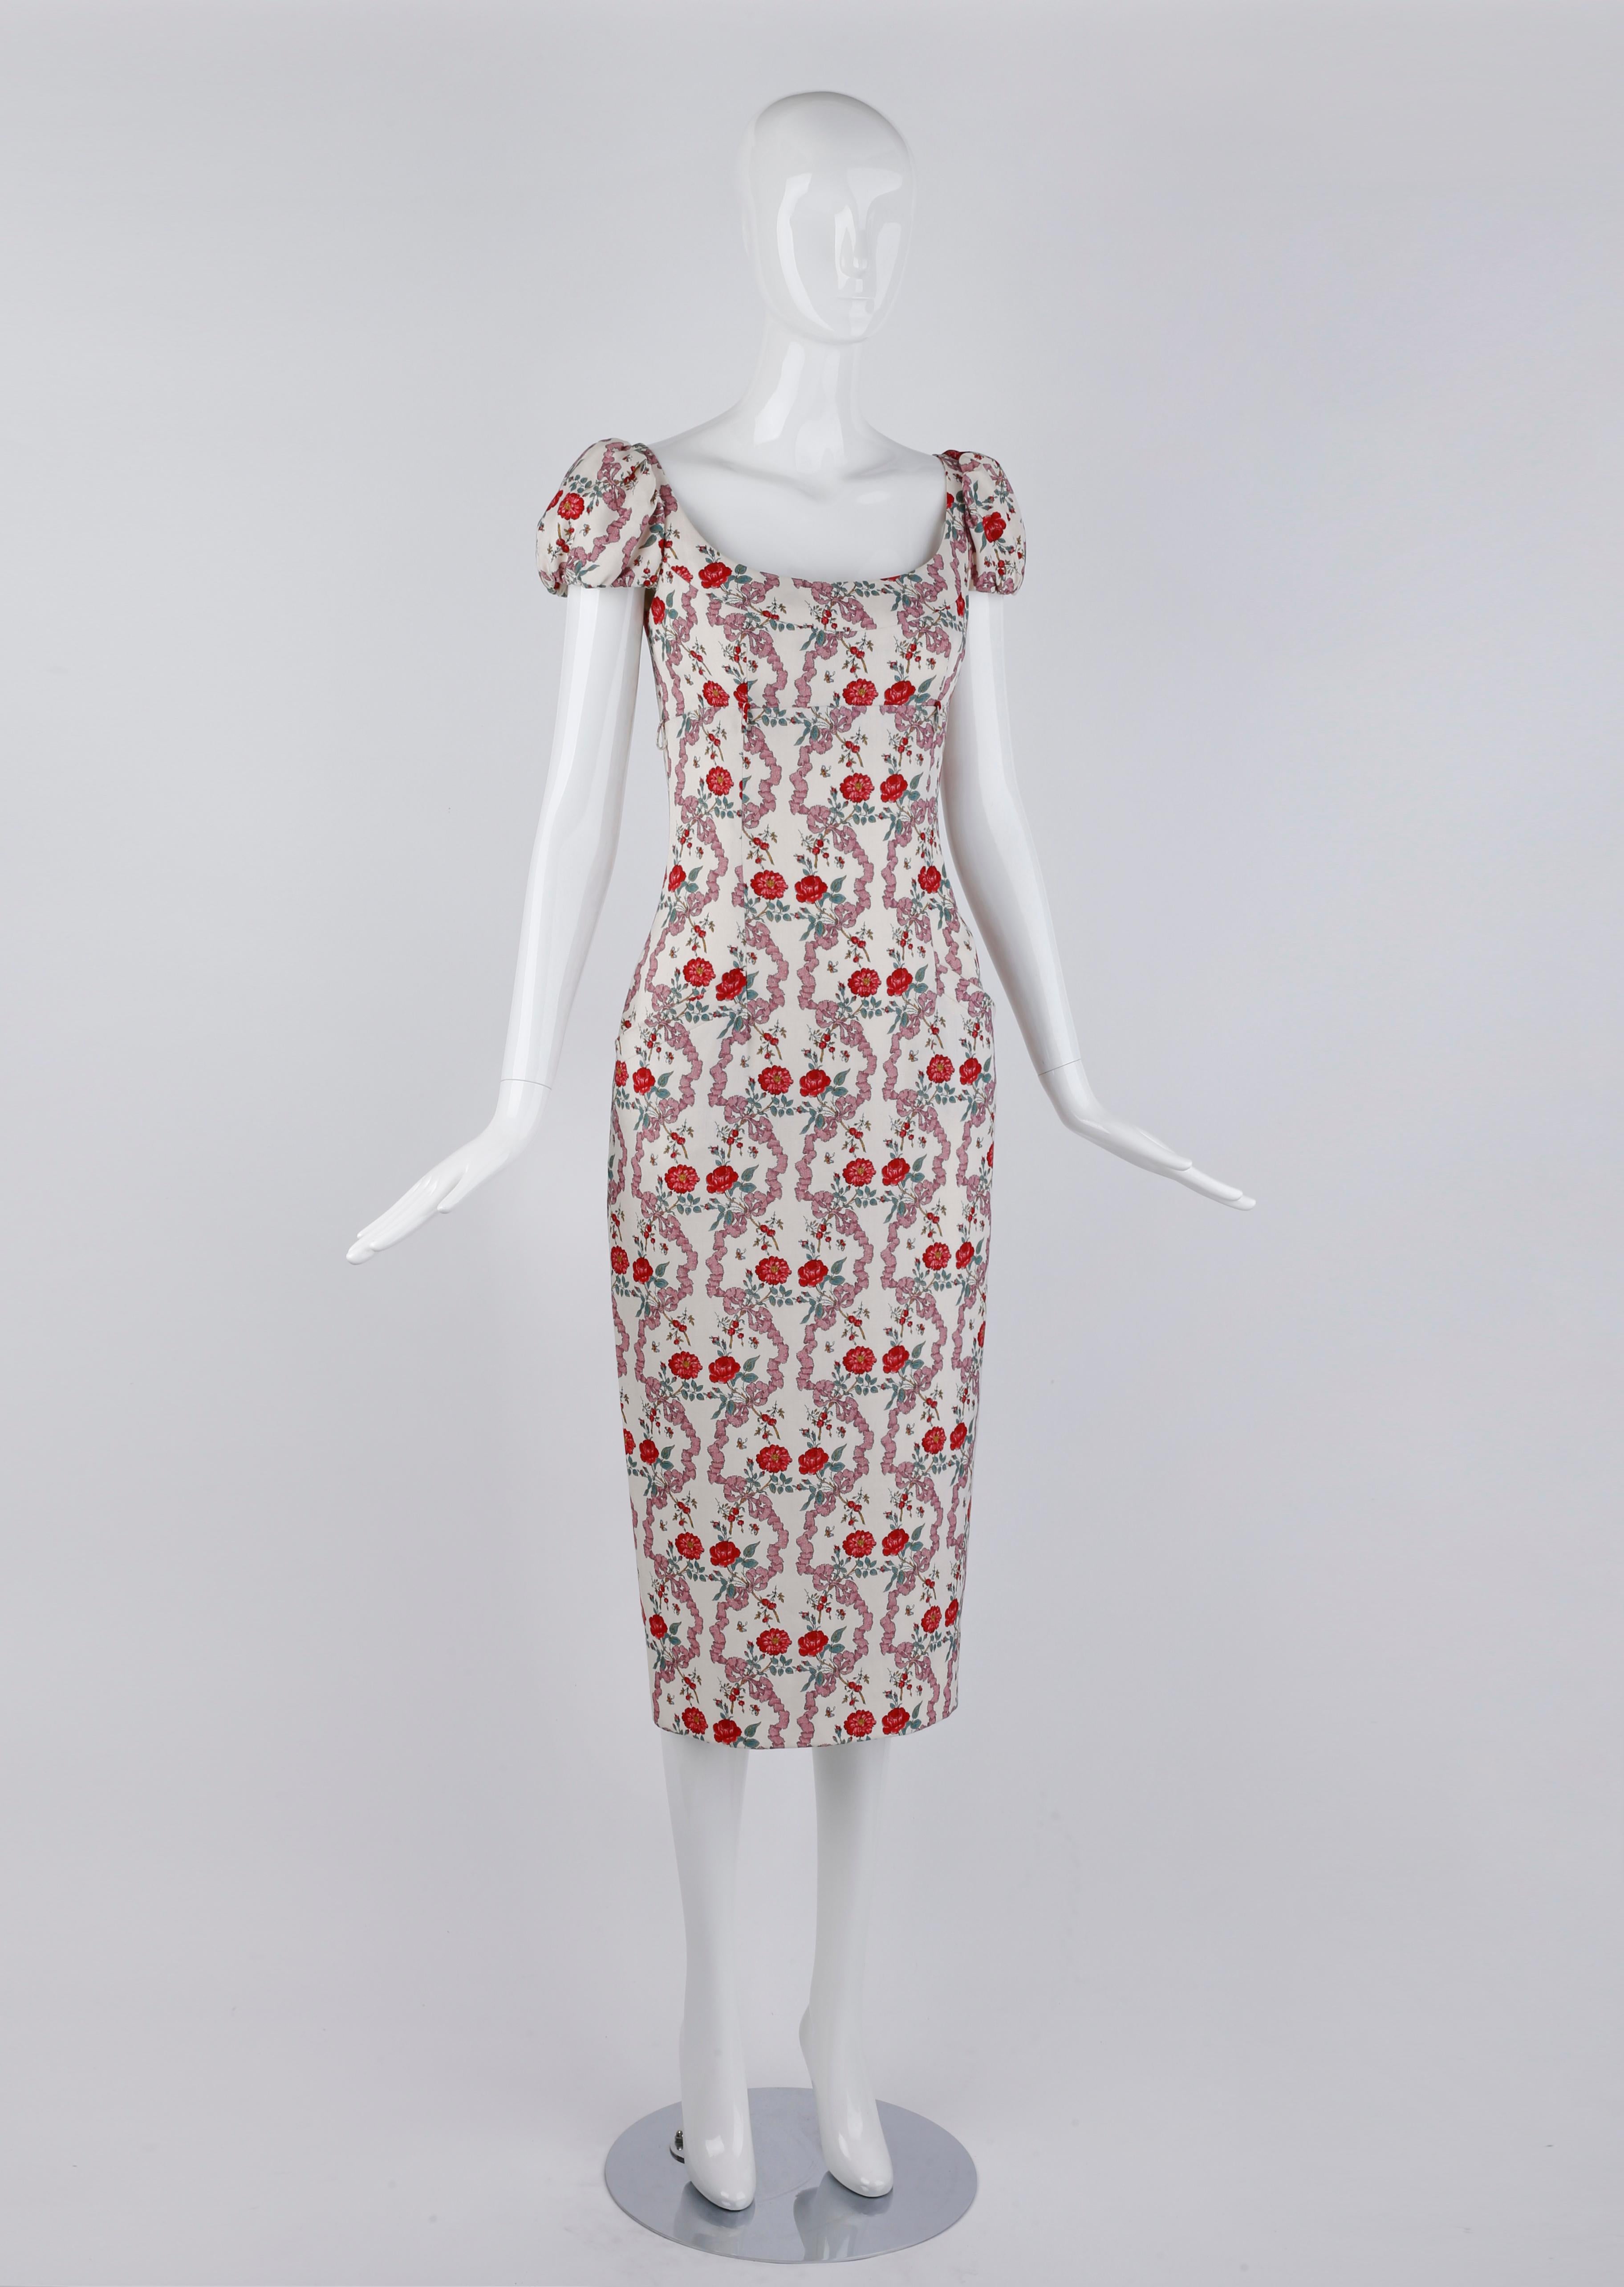 Gray Givenchy Couture John Galliano S/S 1997 Bouquet Floral Ribbon Print Midi Dress For Sale